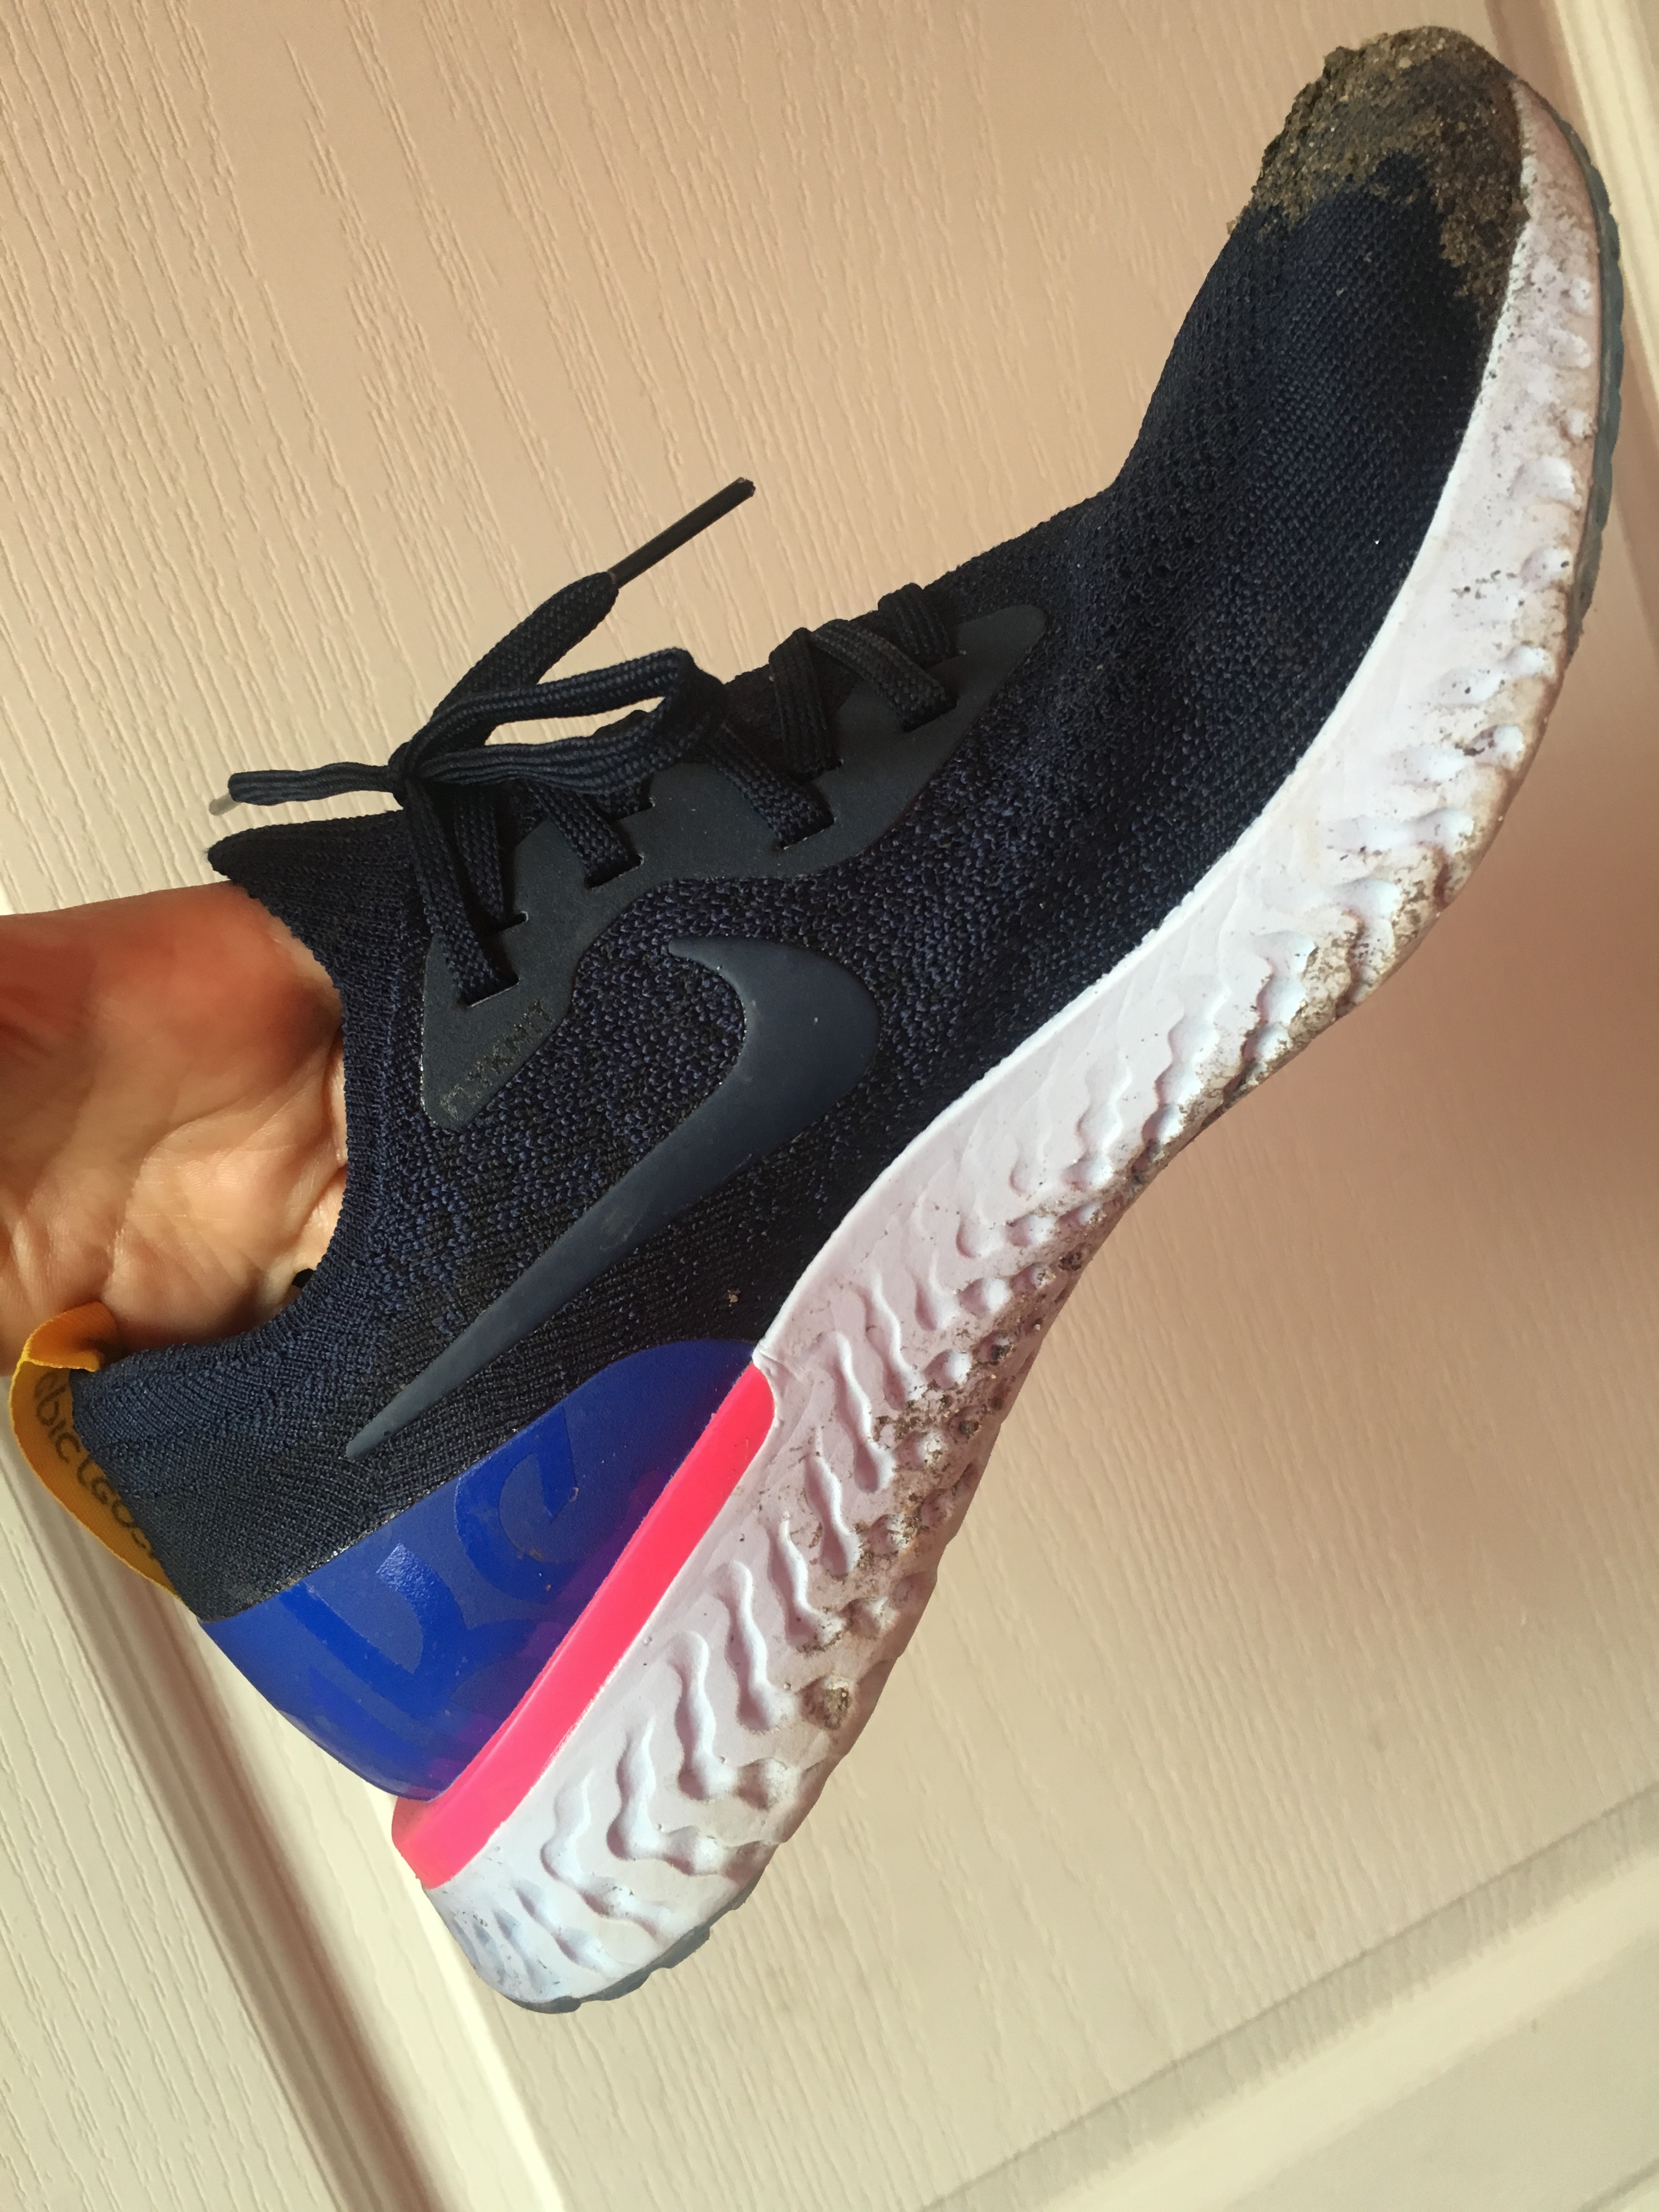 nike epic react flyknit for running